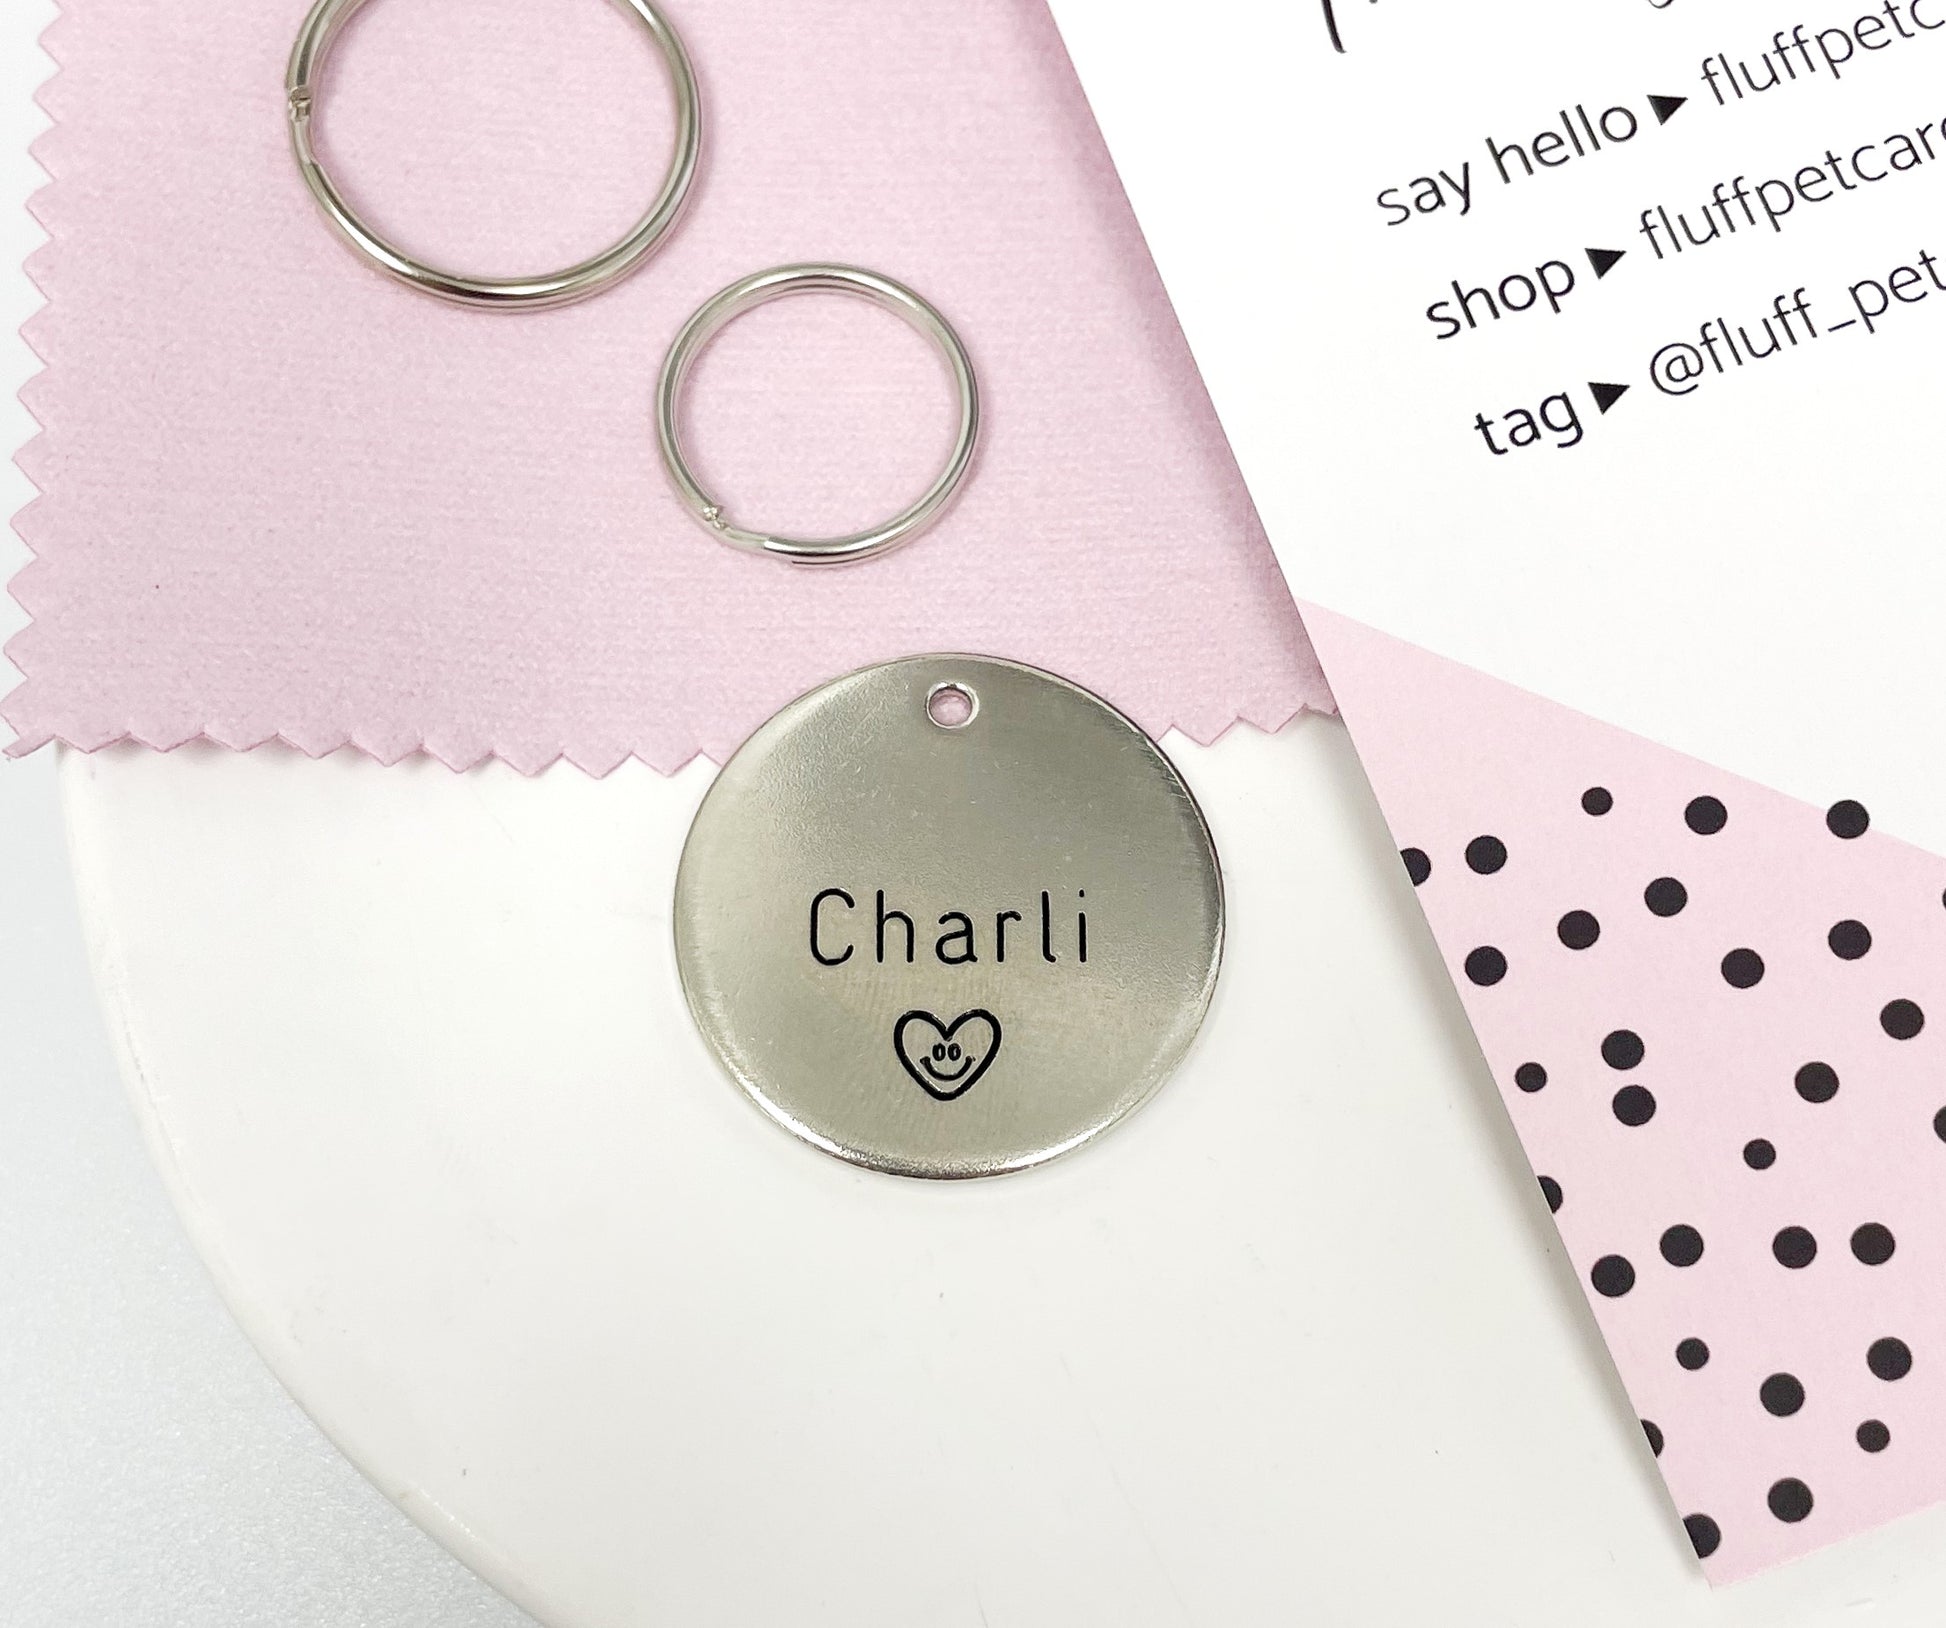 Personalized Dog Tag - Smiley Face Design Engraved Dog Tag - Heart Design Tag - Cat ID Tag - Dog Collar Tag - Custom Dog Tag - Personalized Tag - Pet ID Tag - Pet Name Tag